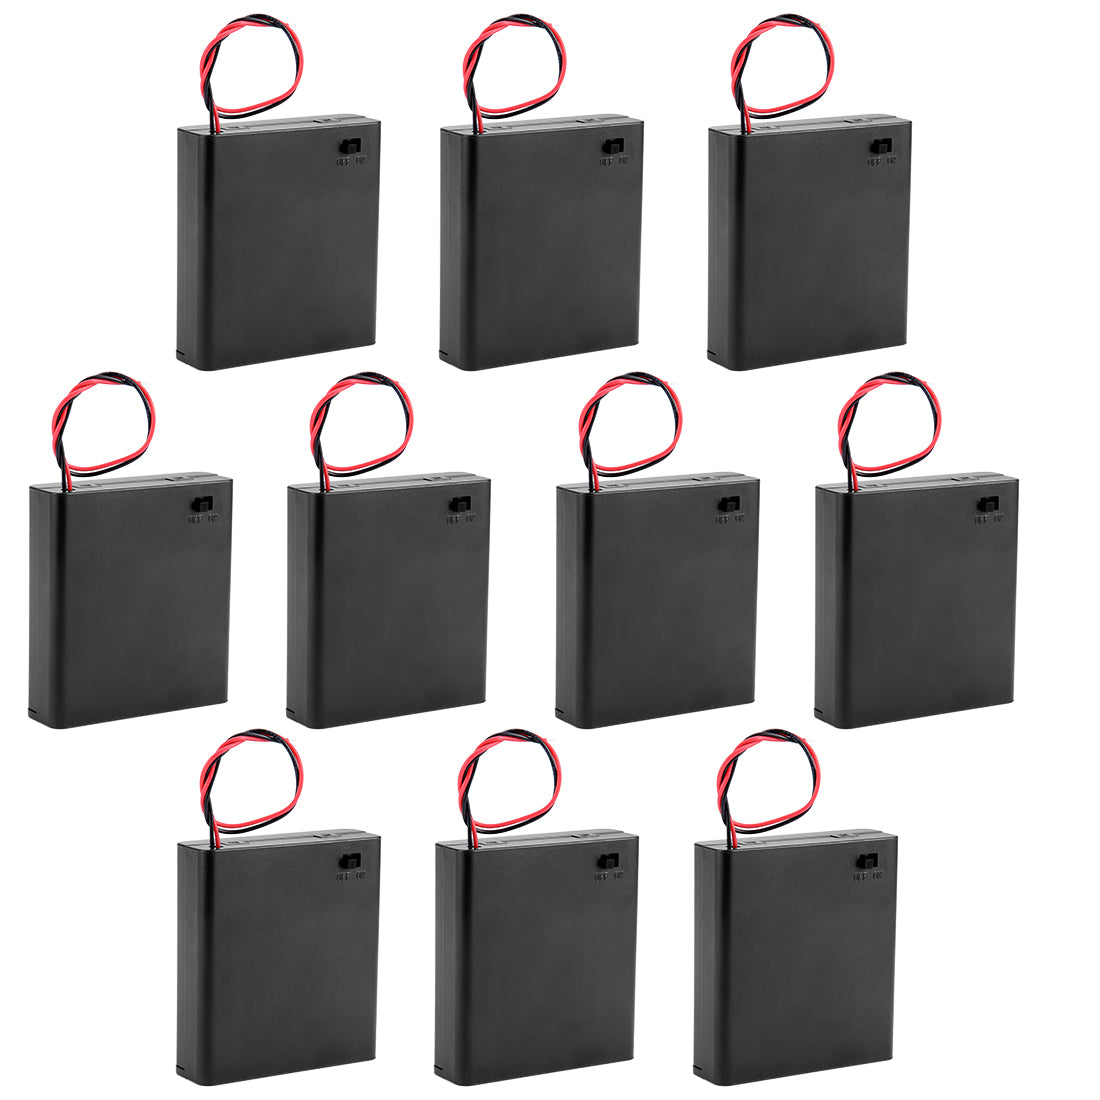 uxcell Uxcell 10 Pcs 6V Battery Case Storage Box 4 x 1.5V AA Batteries Wired ON/OFF Switch W Cover